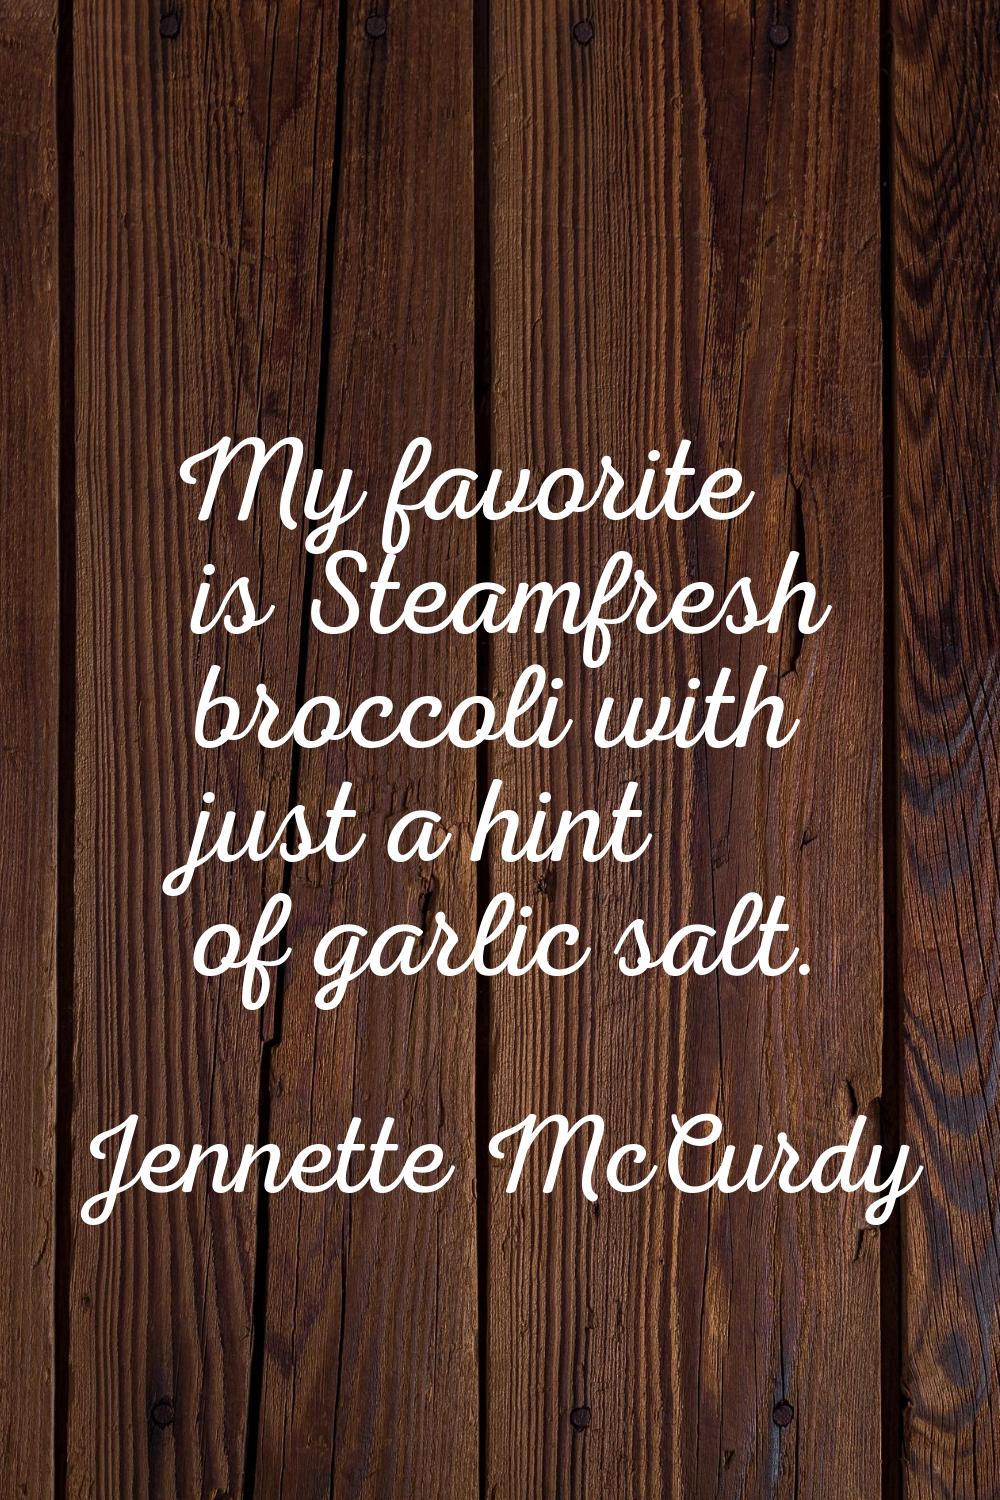 My favorite is Steamfresh broccoli with just a hint of garlic salt.